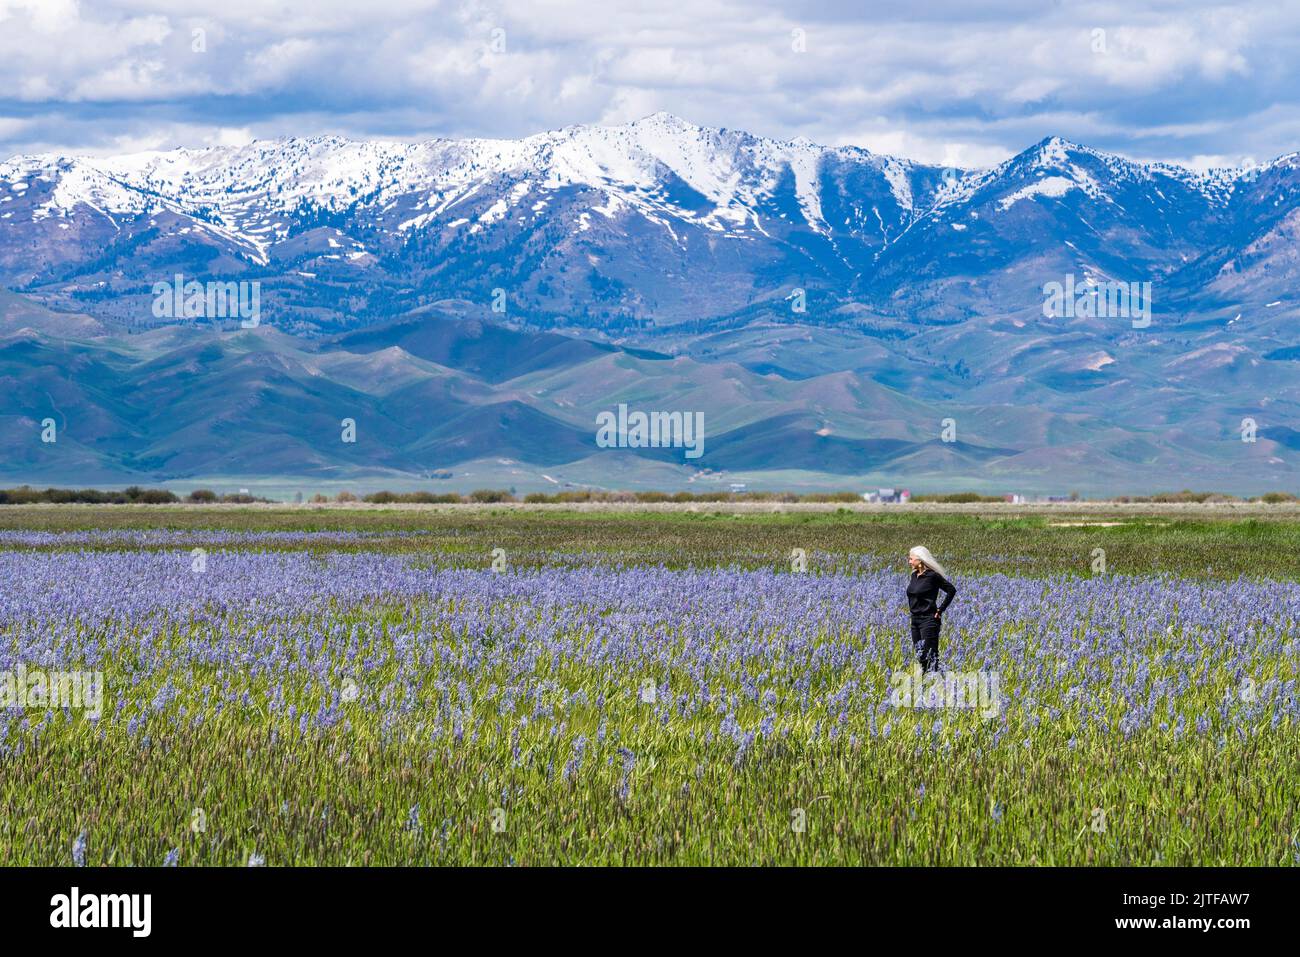 United States, Idaho, Fairfield, Senior woman standing in field of camas lilies with Soldier Mountain in background Stock Photo